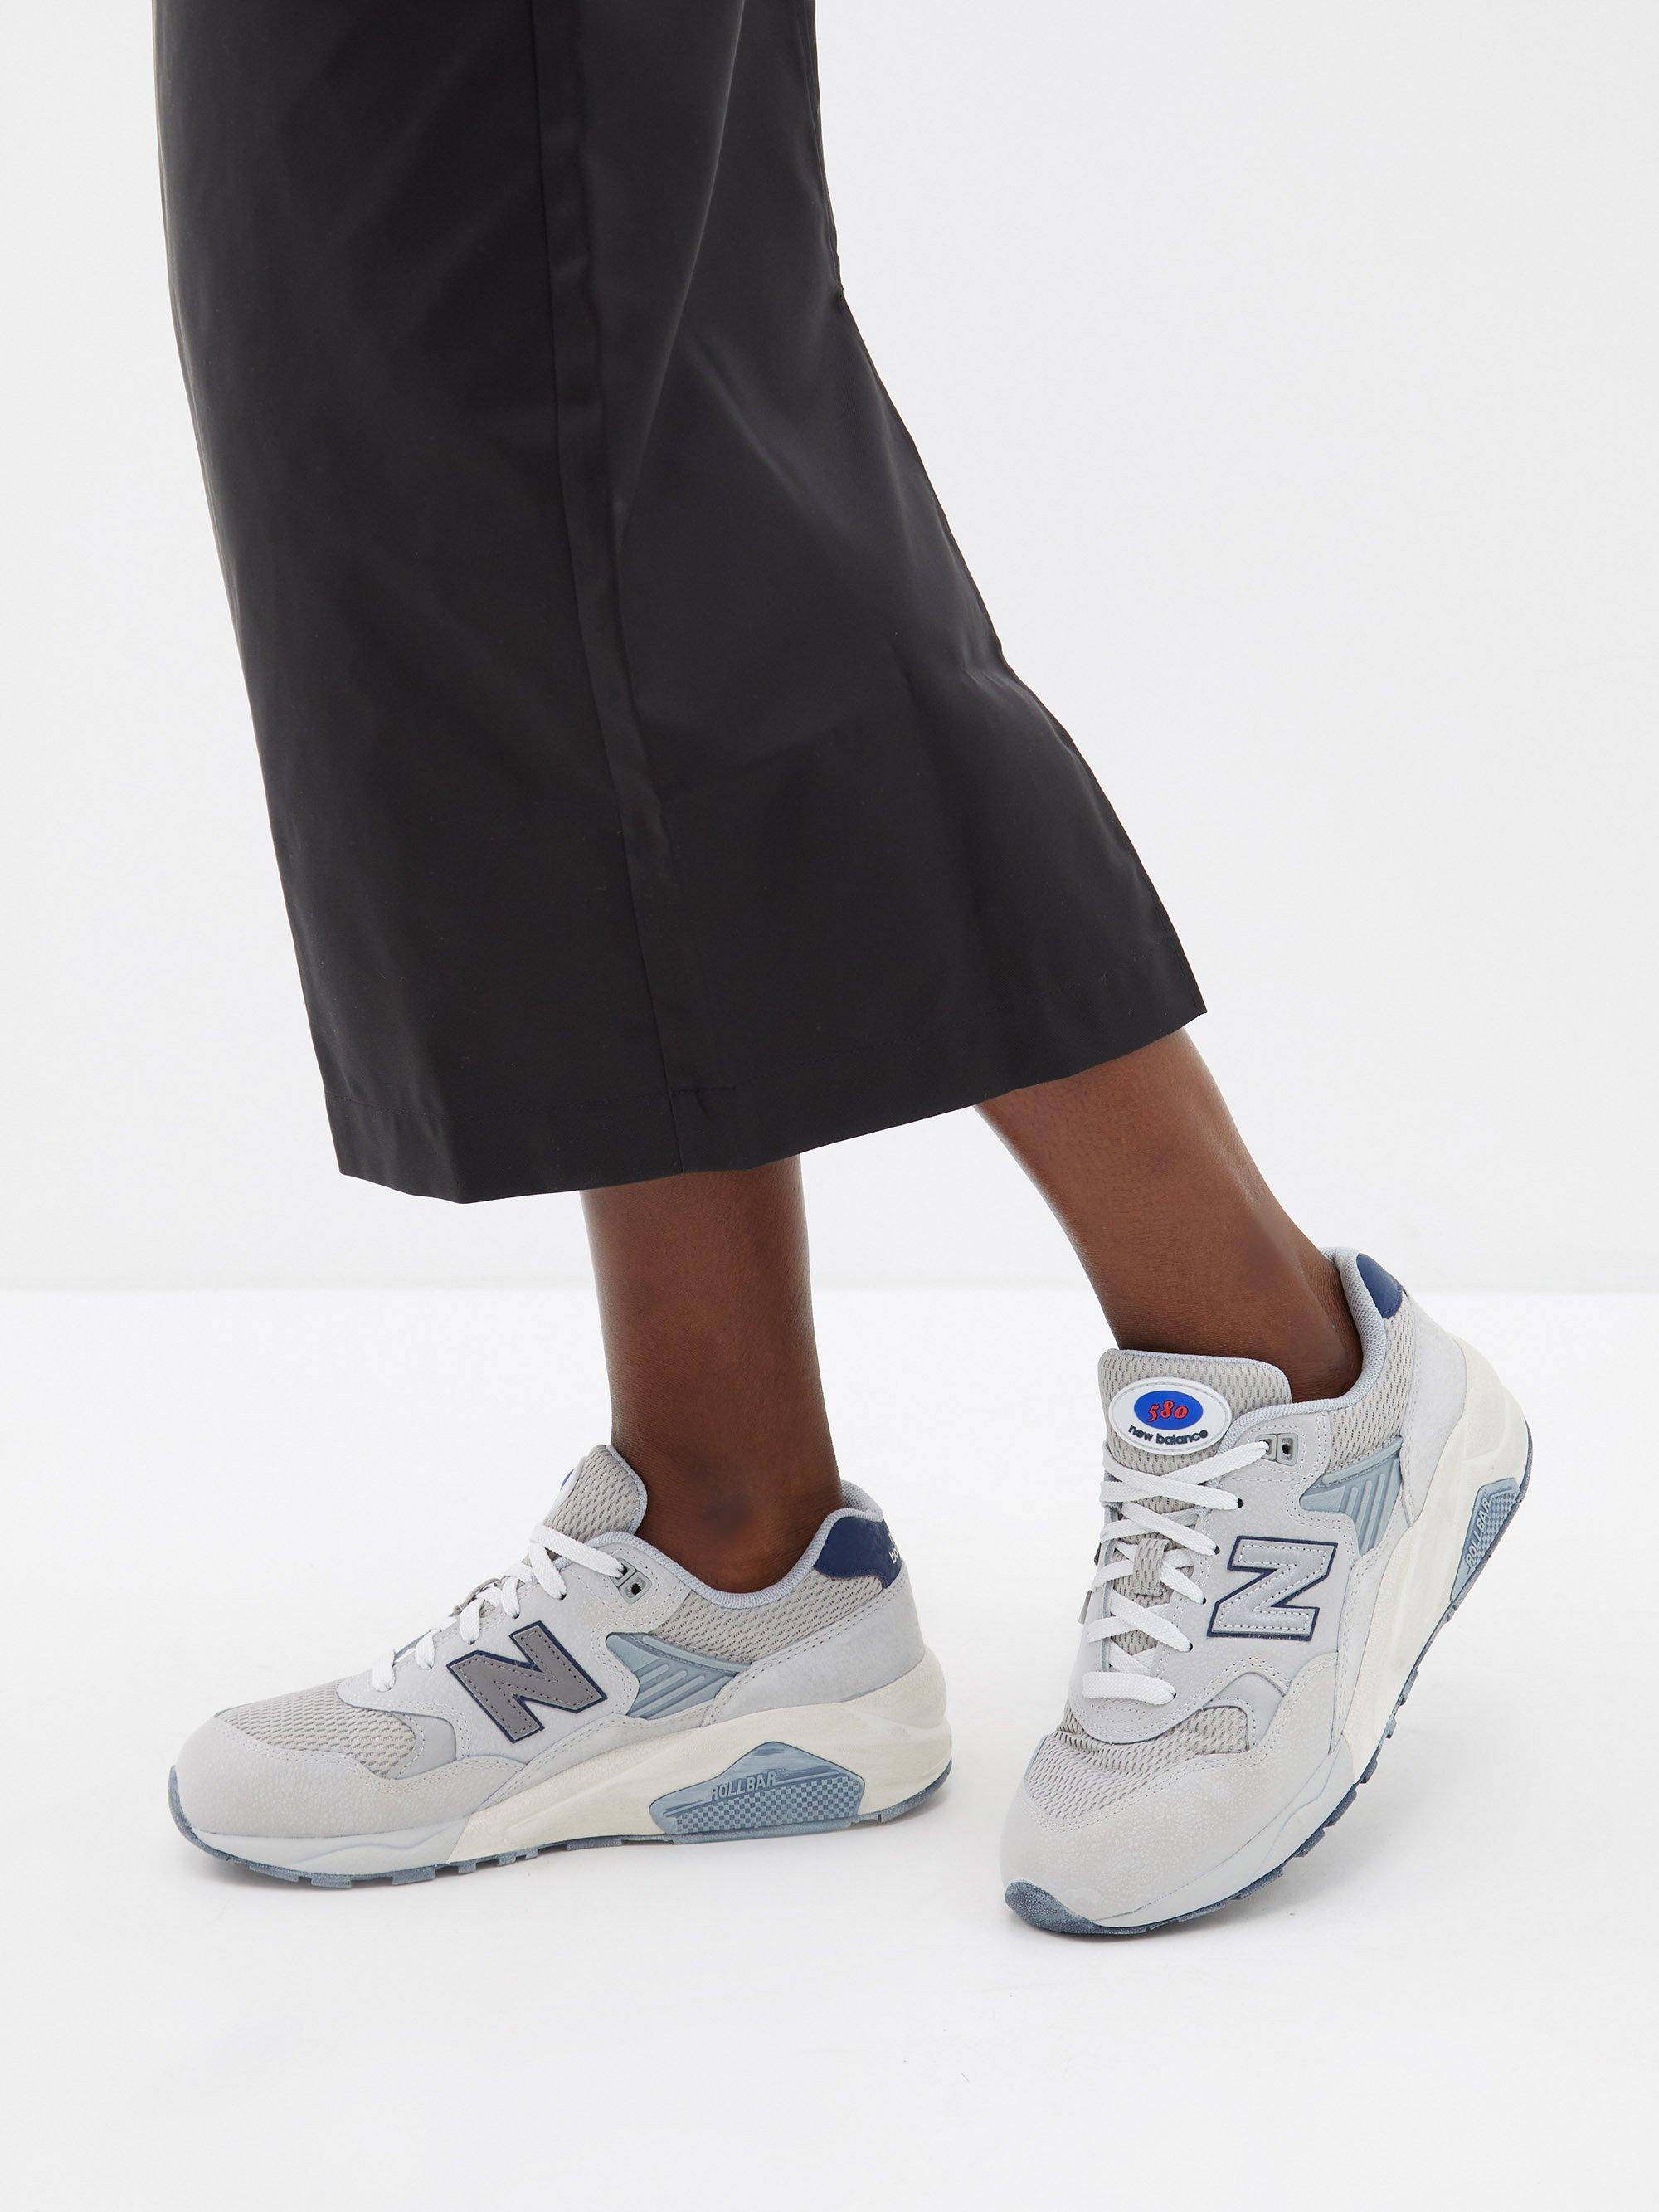 New Balance Mt580 Suede And Mesh Trainers in White | Lyst